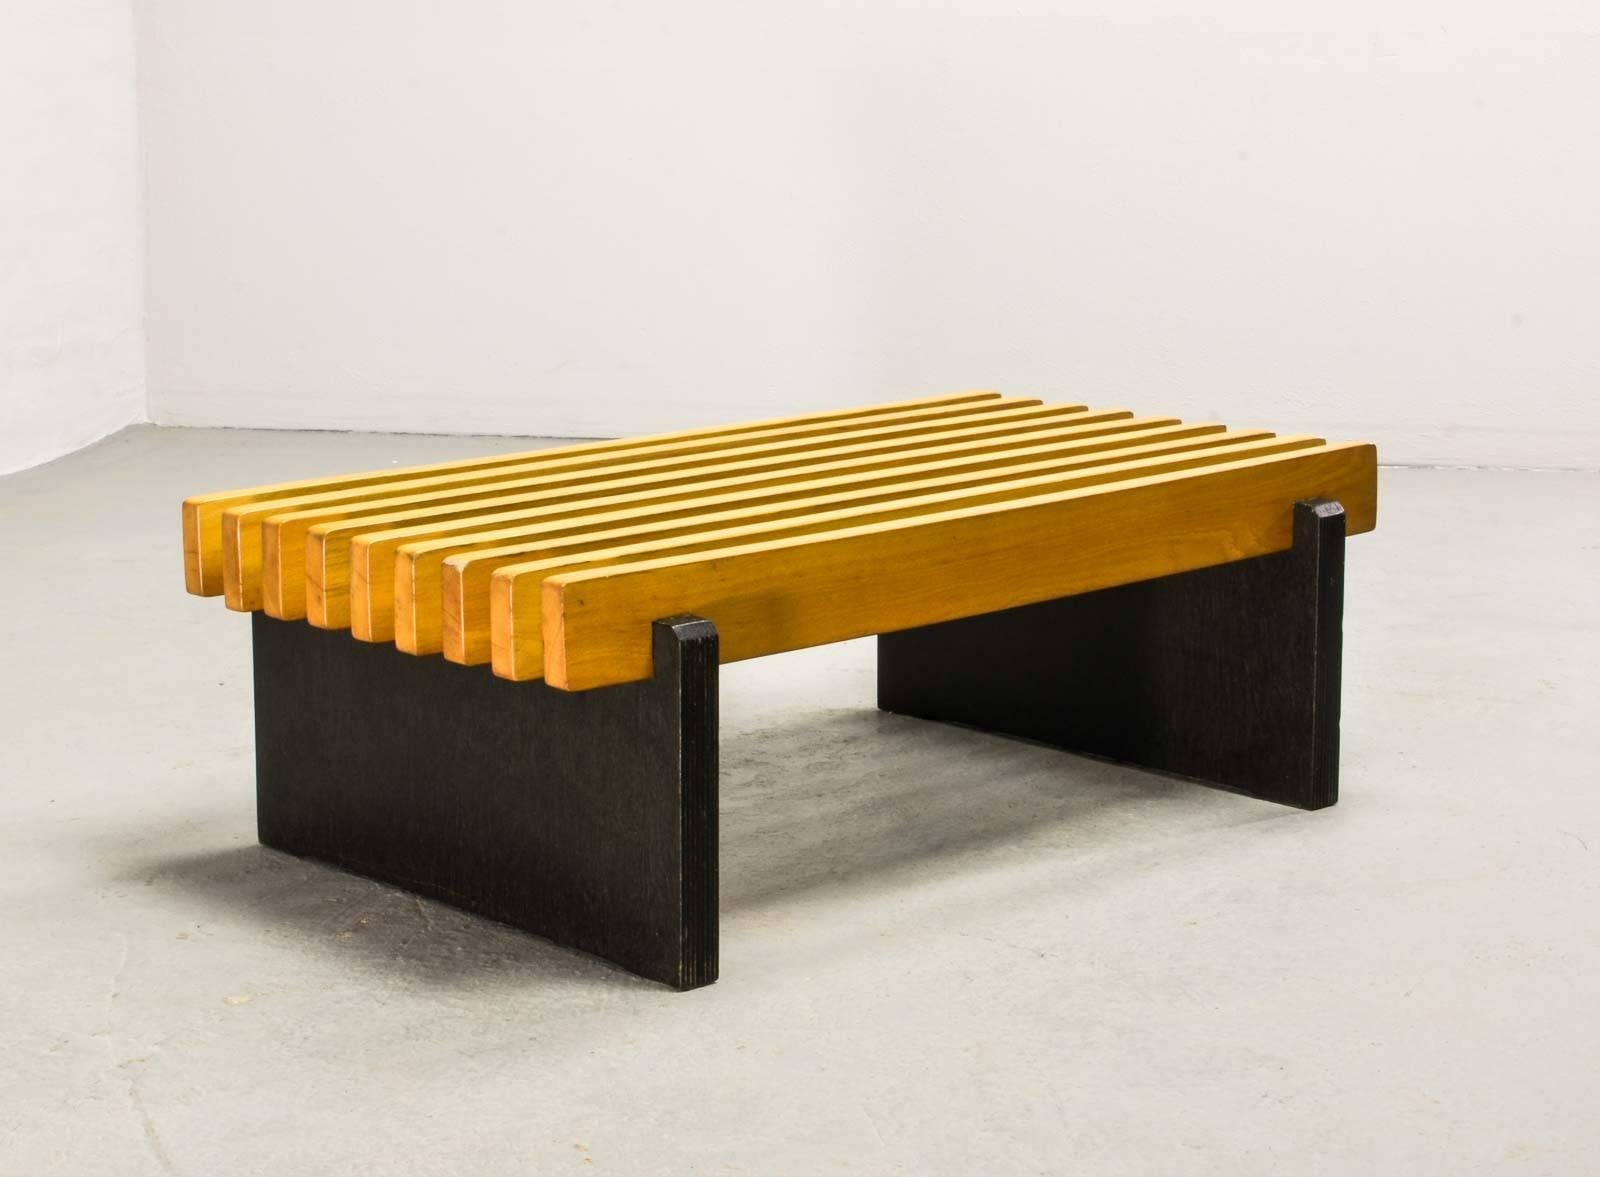 Rarely seen beech wooden slat bench Dutch design in style of Spectrum, manufactured in the 1960s. It fits perfectly as a side bench in a minimalistic natural oriented interior. This solid bench is in good condition with light wear consistent its age